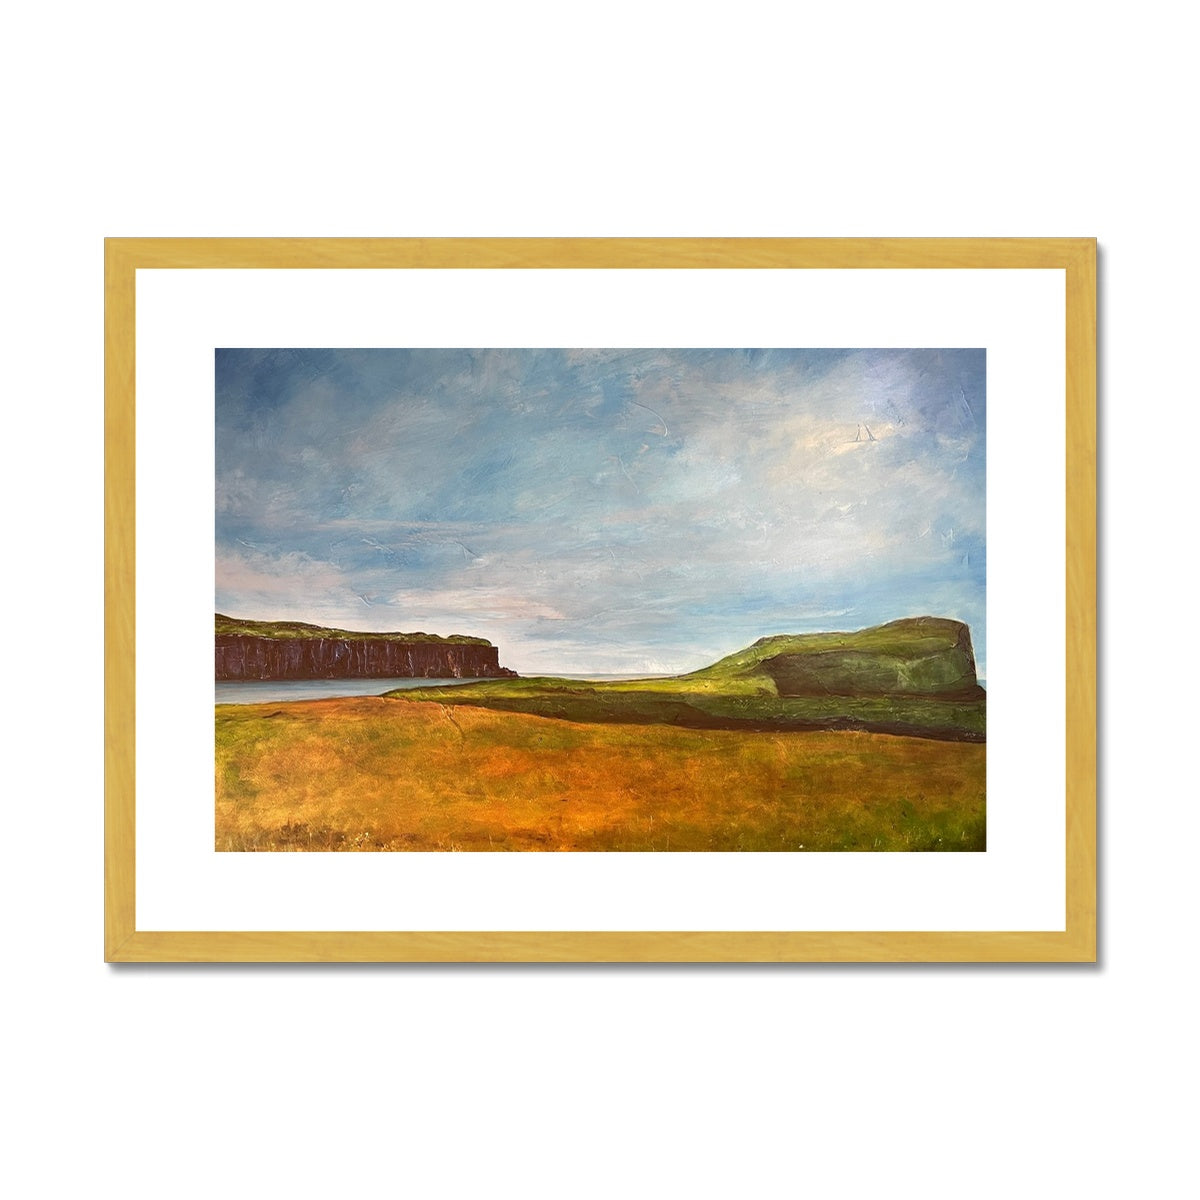 Approaching Oronsay Skye Painting | Antique Framed & Mounted Prints From Scotland-Antique Framed & Mounted Prints-Skye Art Gallery-A2 Landscape-Gold Frame-Paintings, Prints, Homeware, Art Gifts From Scotland By Scottish Artist Kevin Hunter